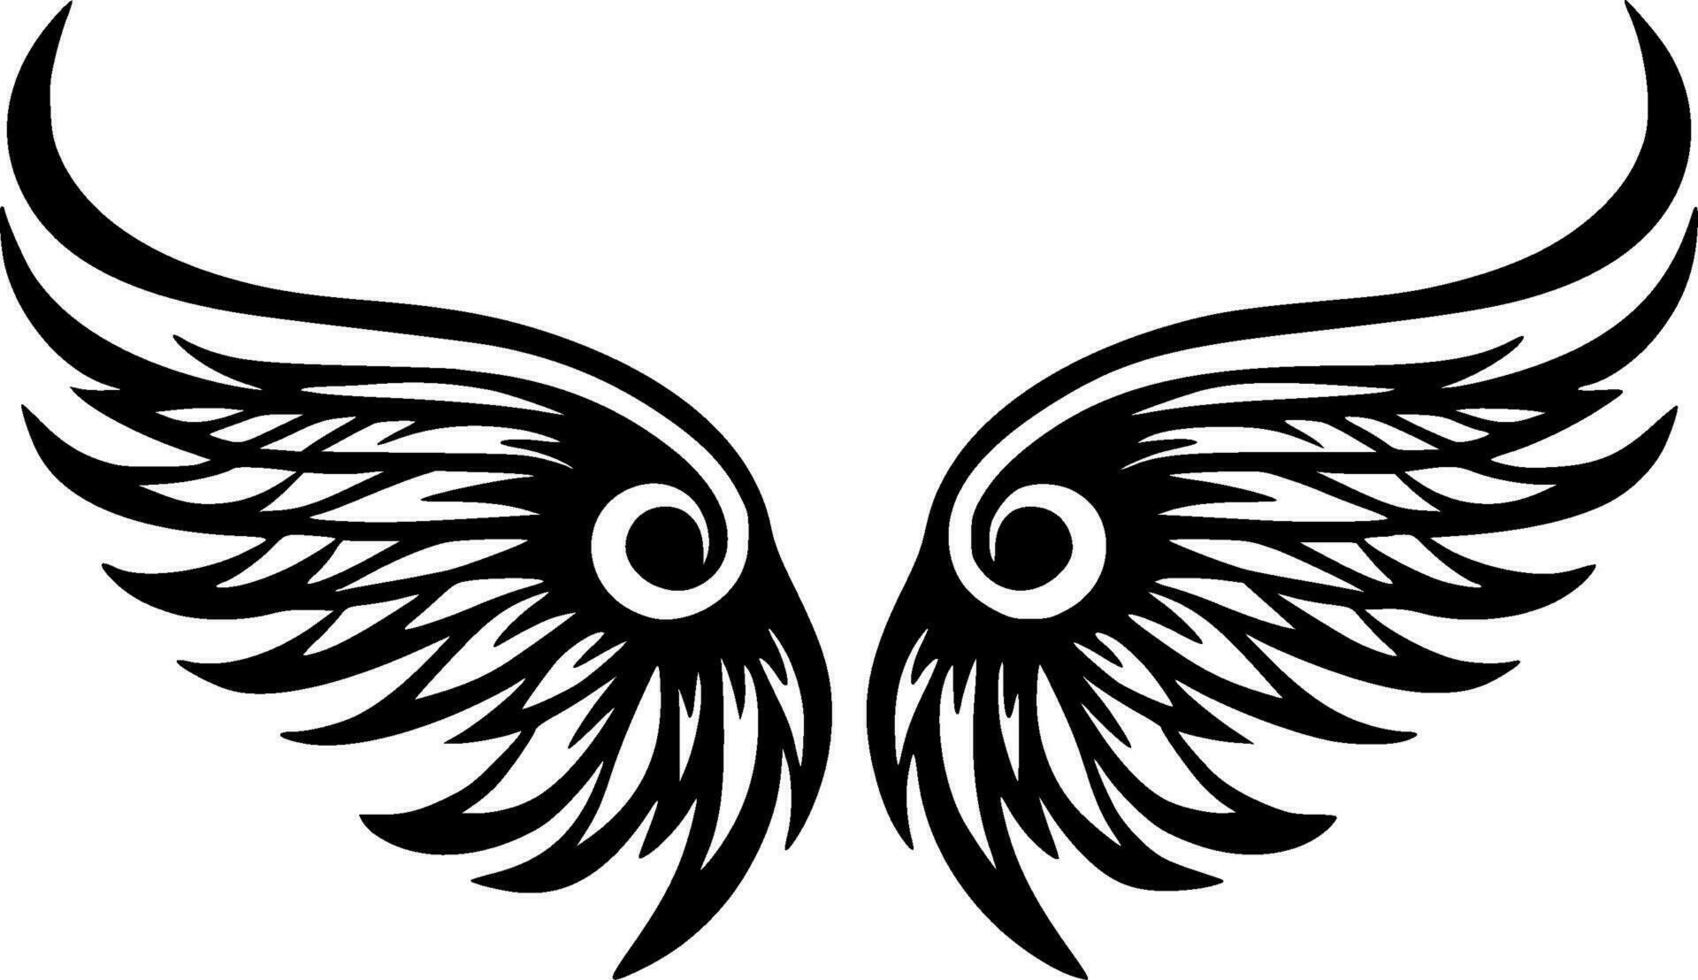 Wings, Black and White Vector illustration